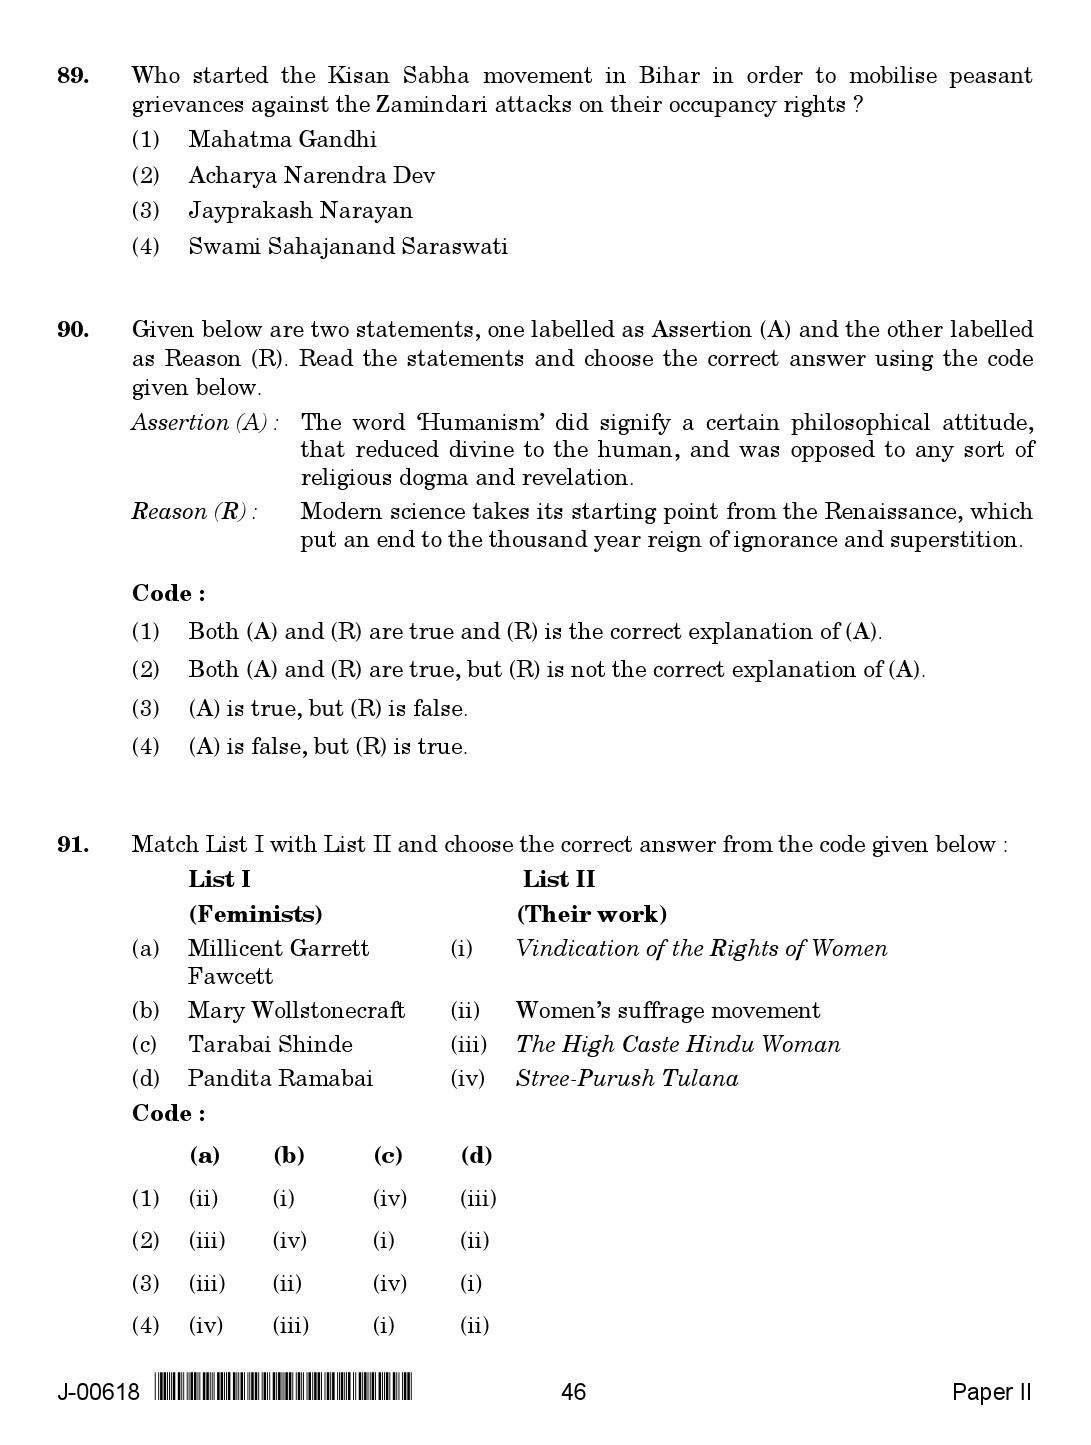 History Question Paper II July 2018 in English 2nd Exam 24